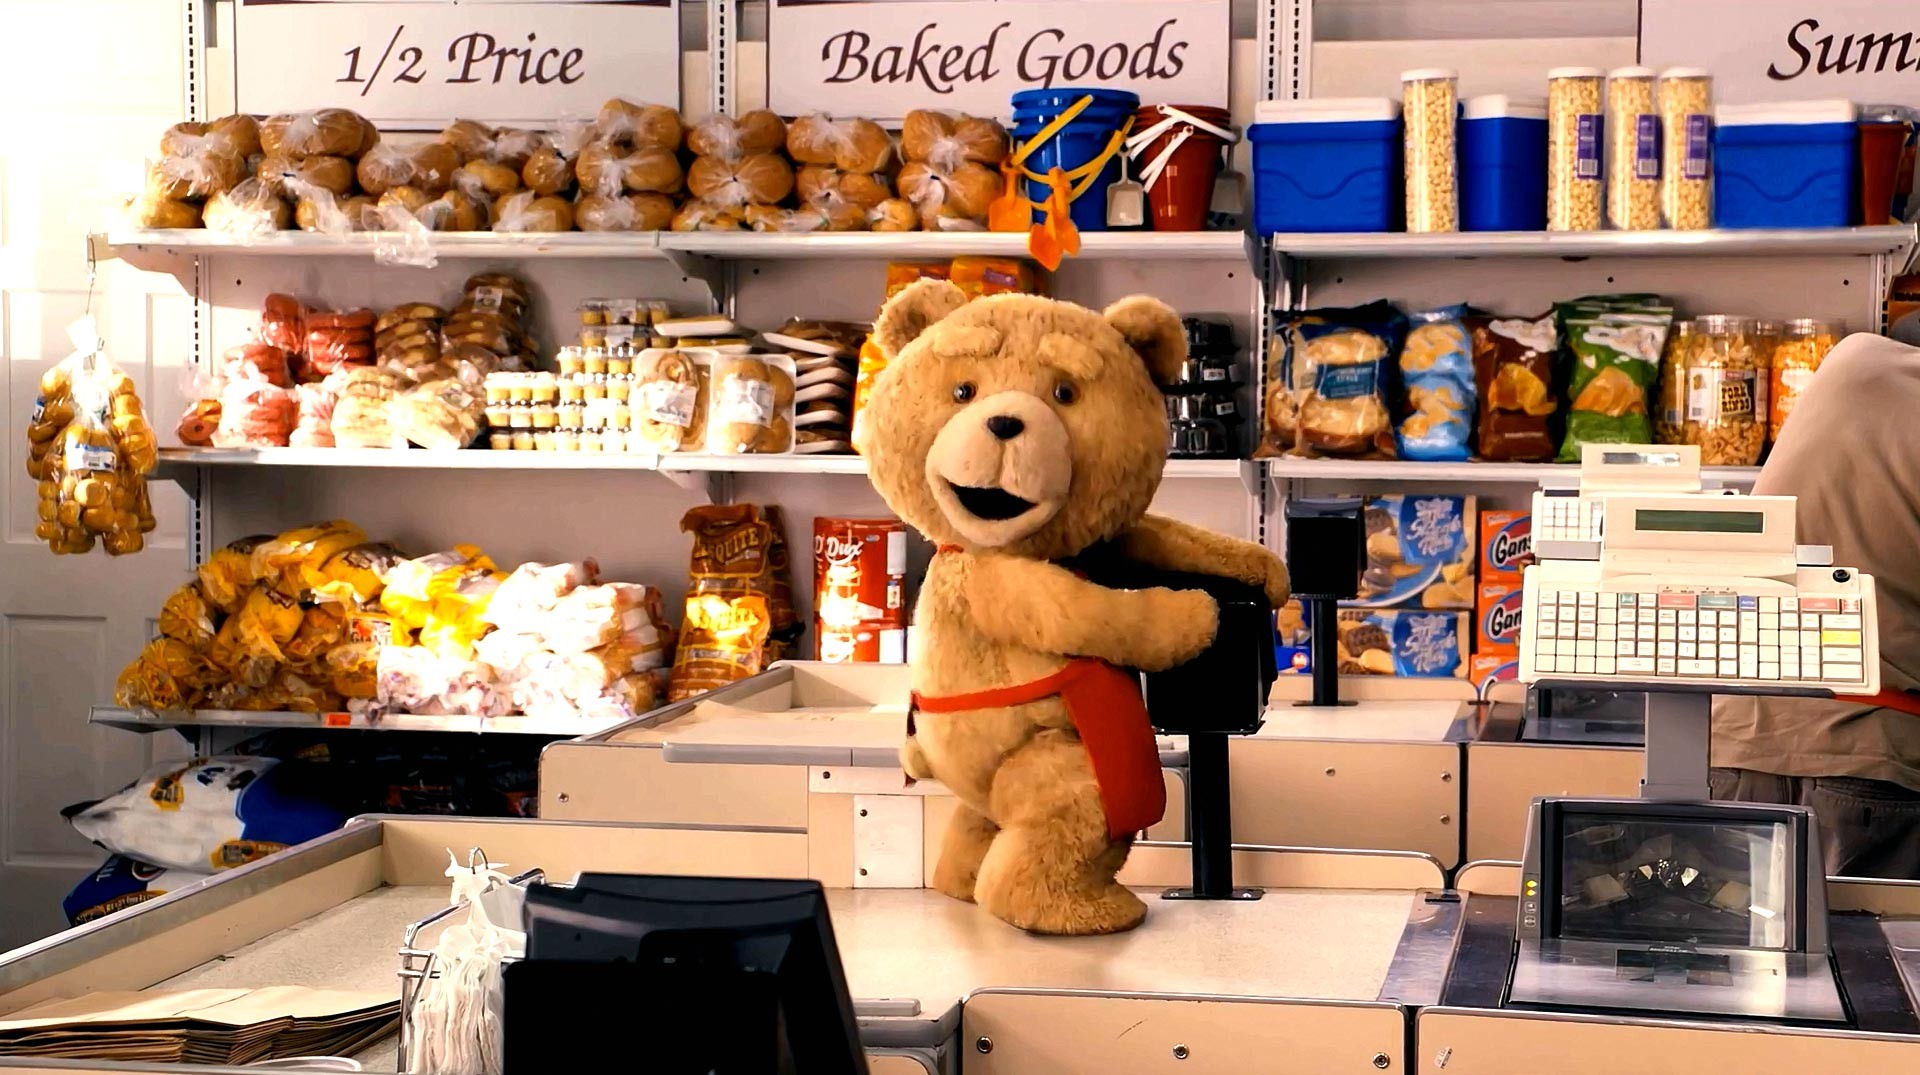 Ted from Universal Pictures' Ted (2012)